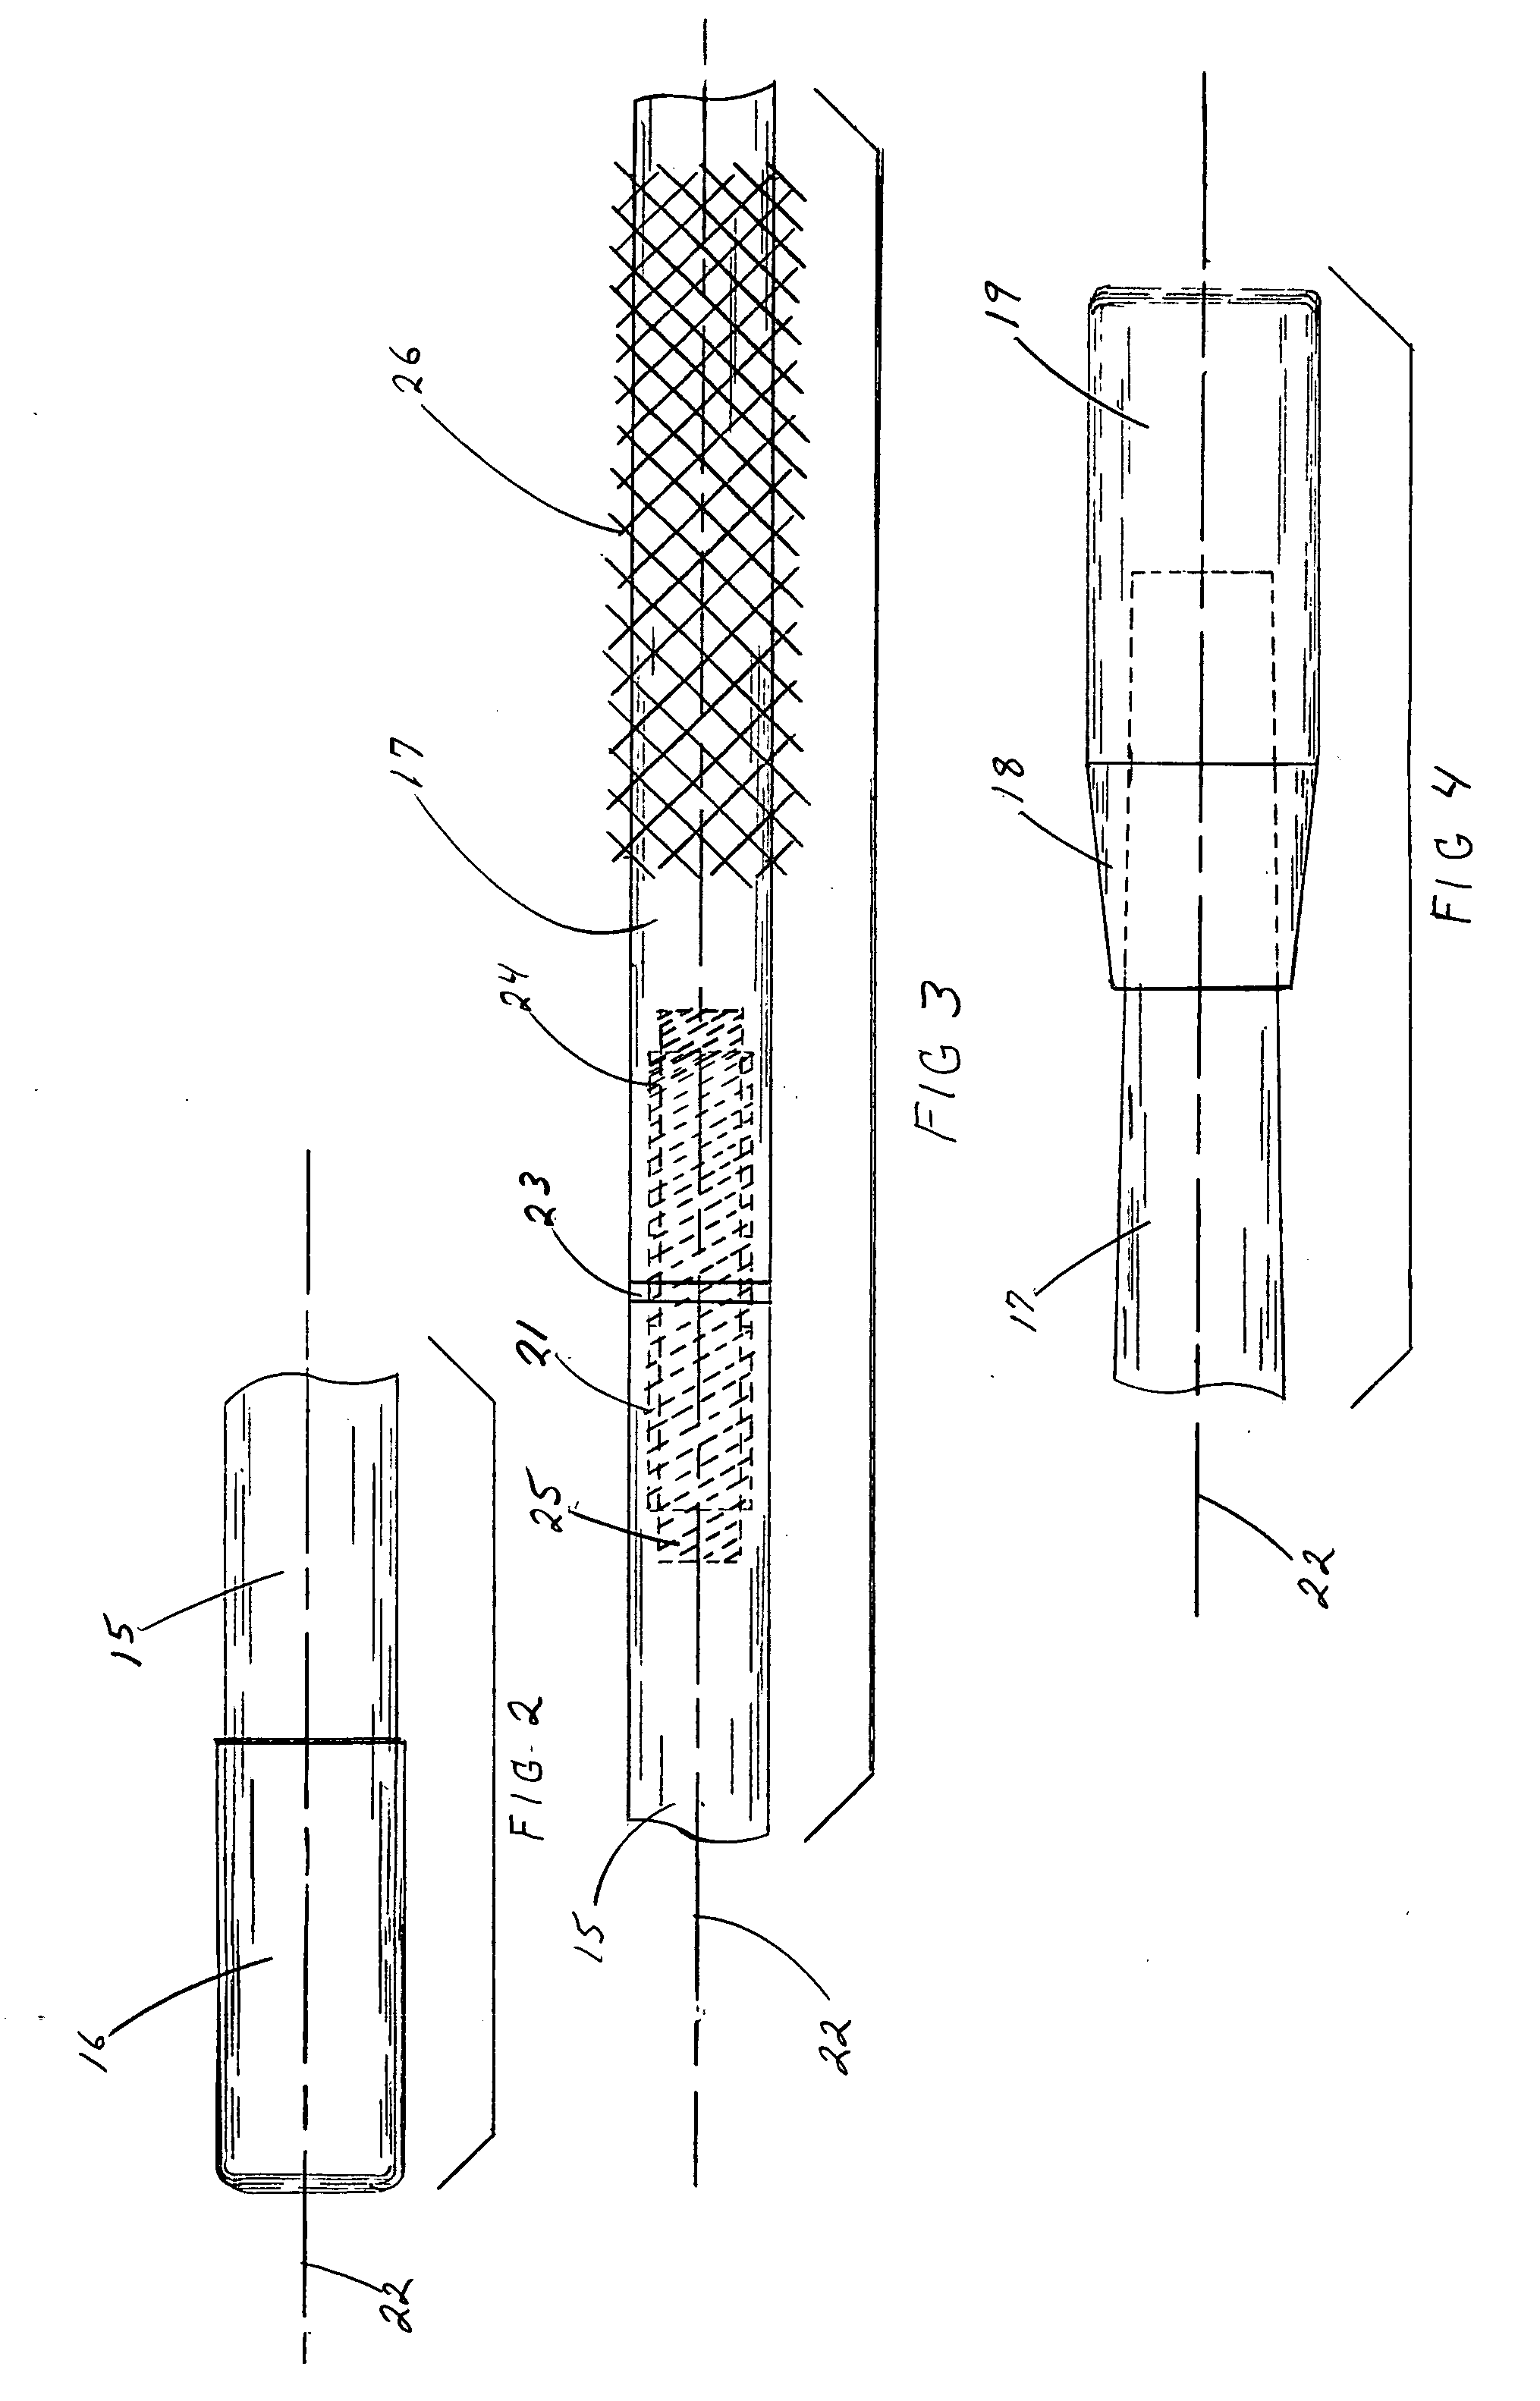 Article of manufacture for improved segmented jump cue stick